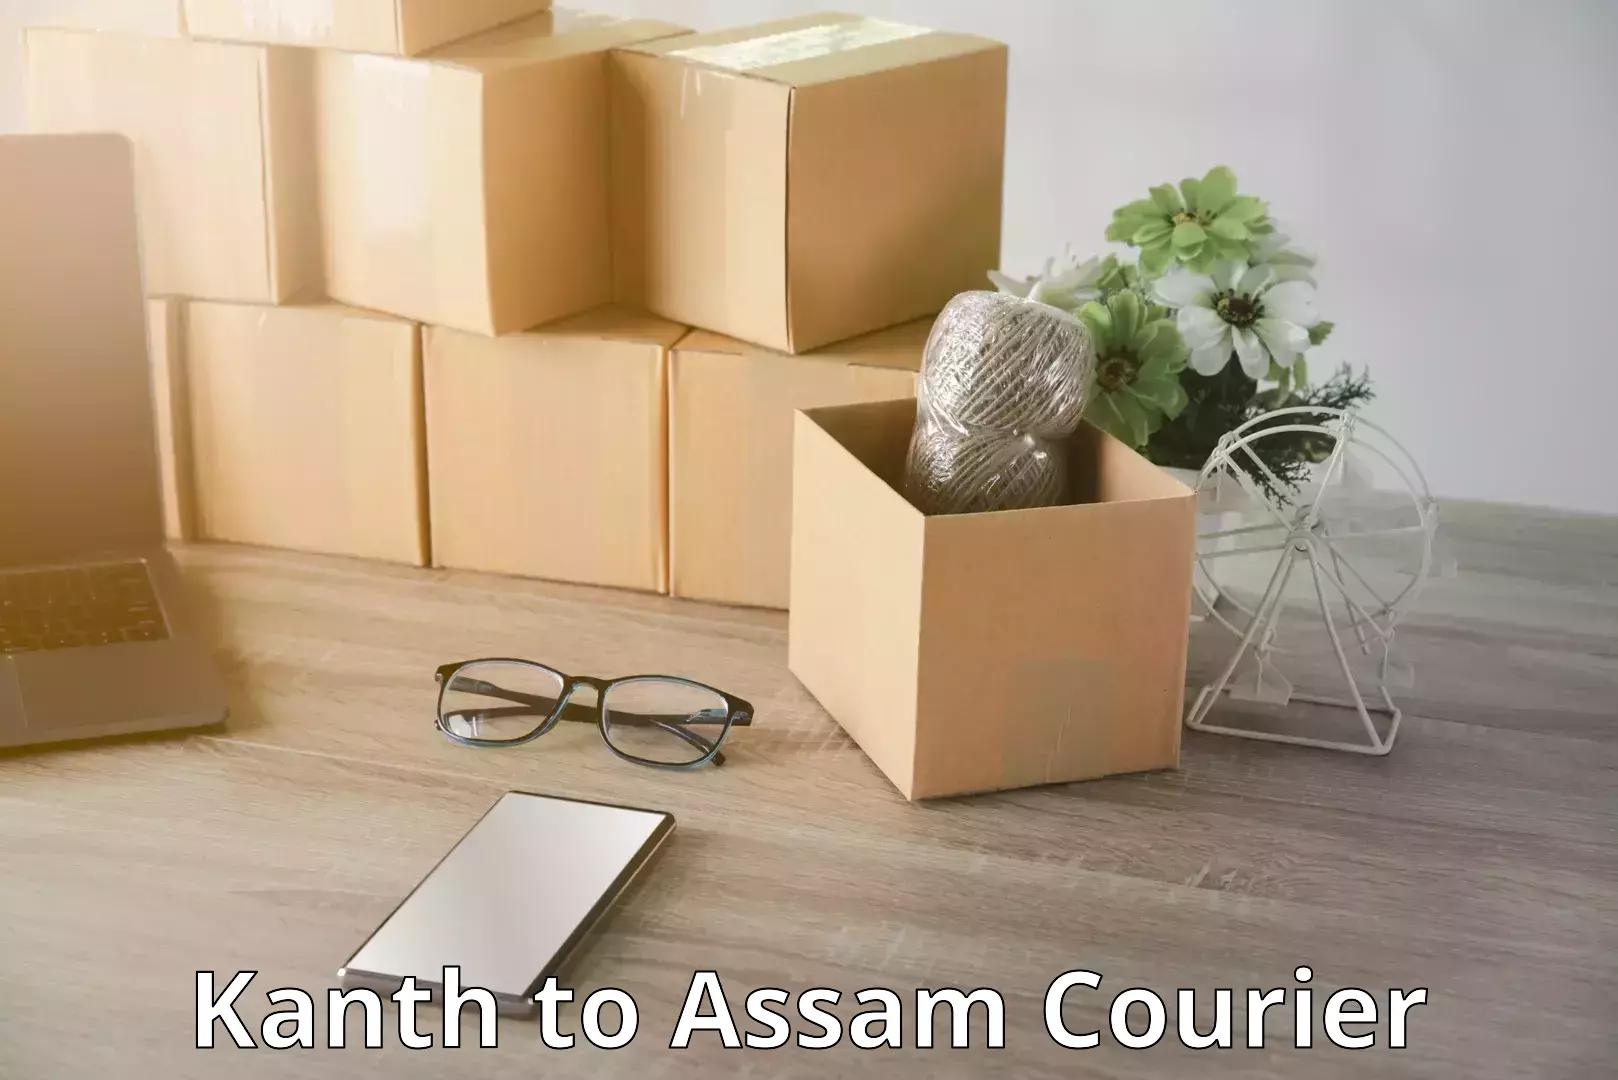 Emergency baggage service Kanth to Assam